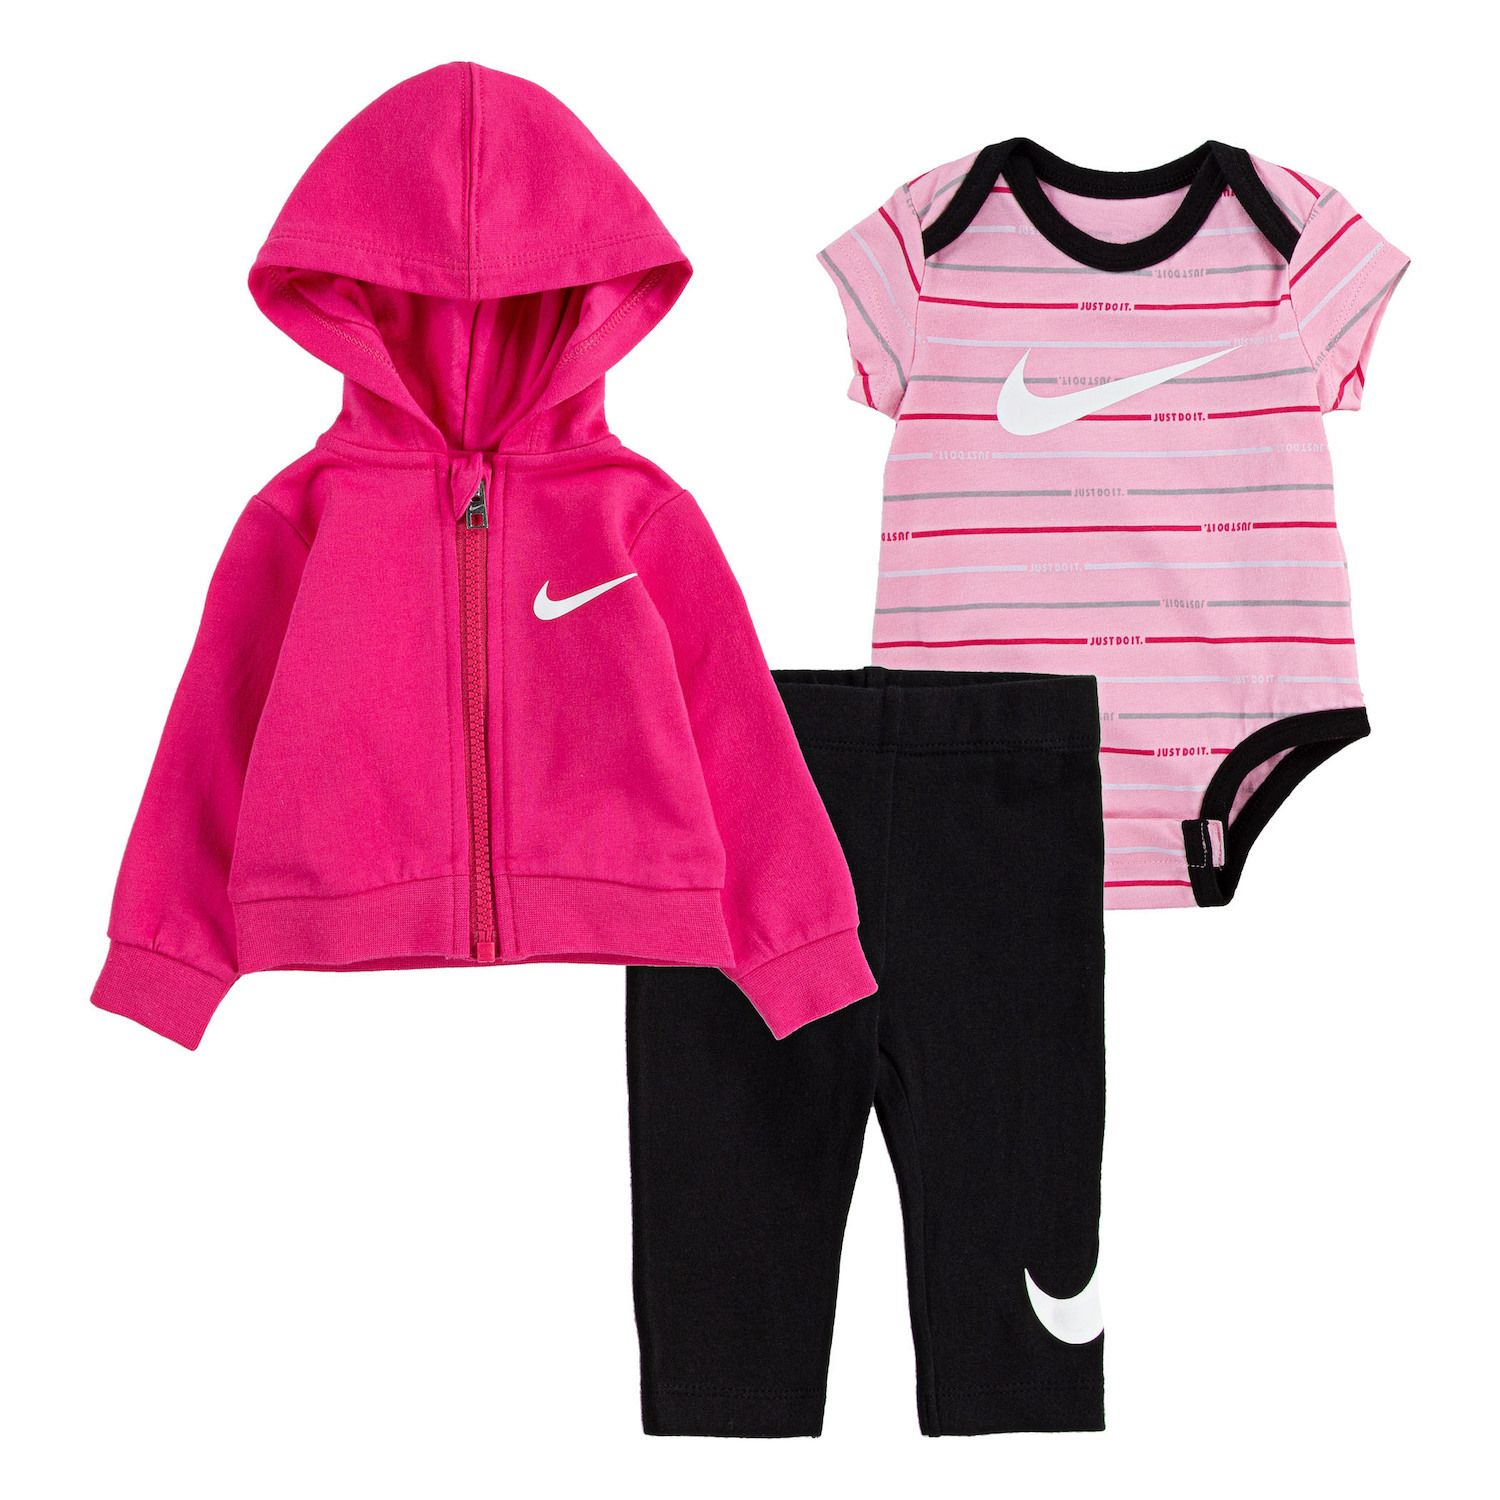 nike baby clothes 18 months